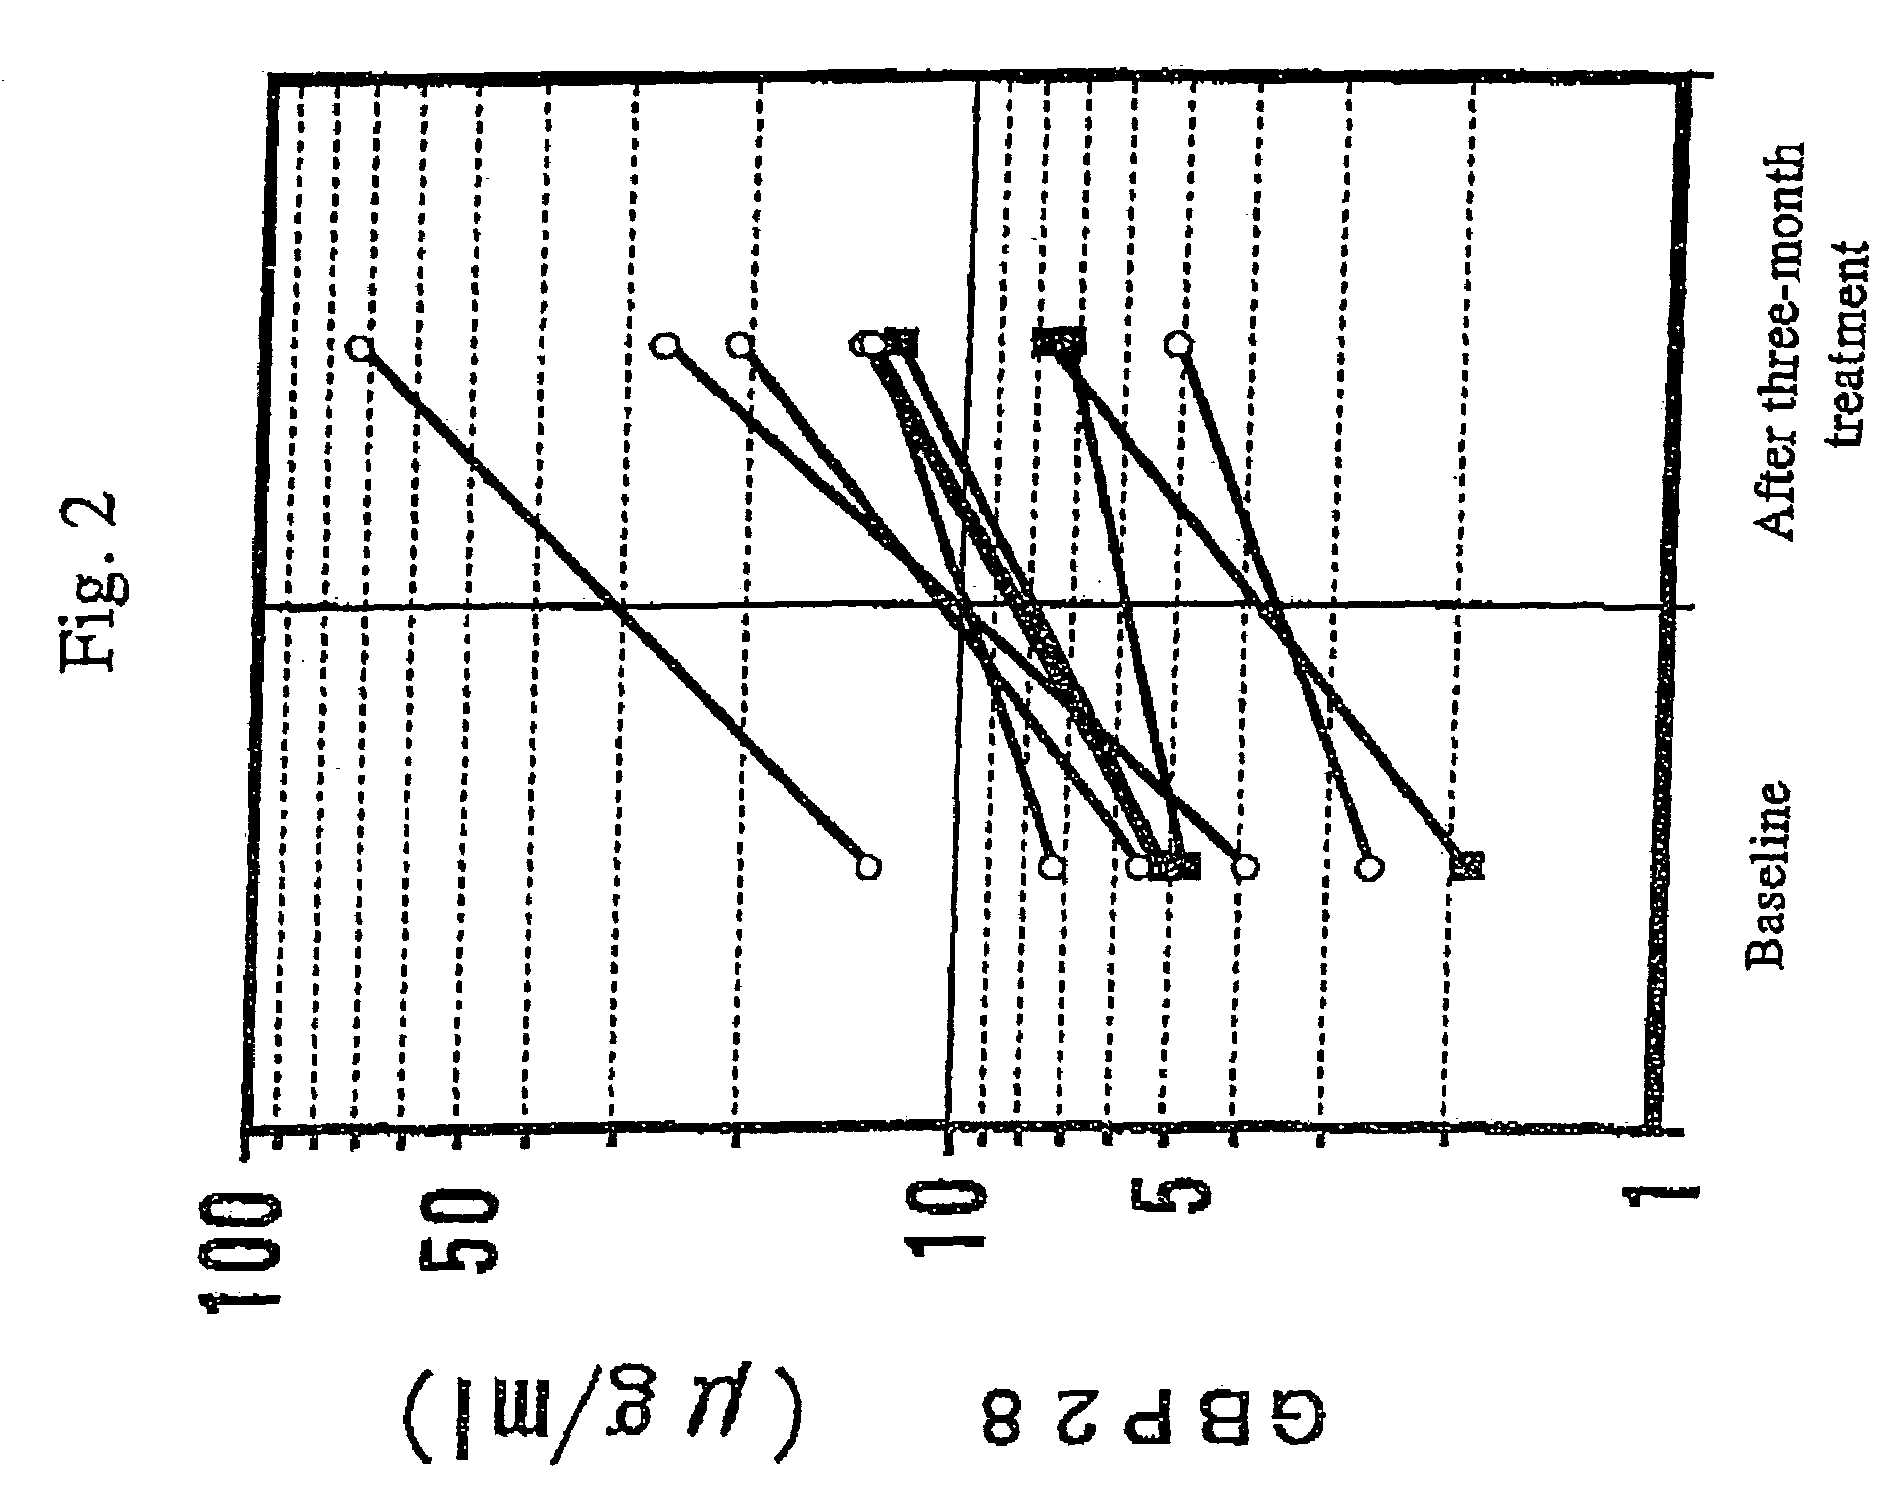 Method for diagnosing or monitoring carbohydrate metabolism disorders